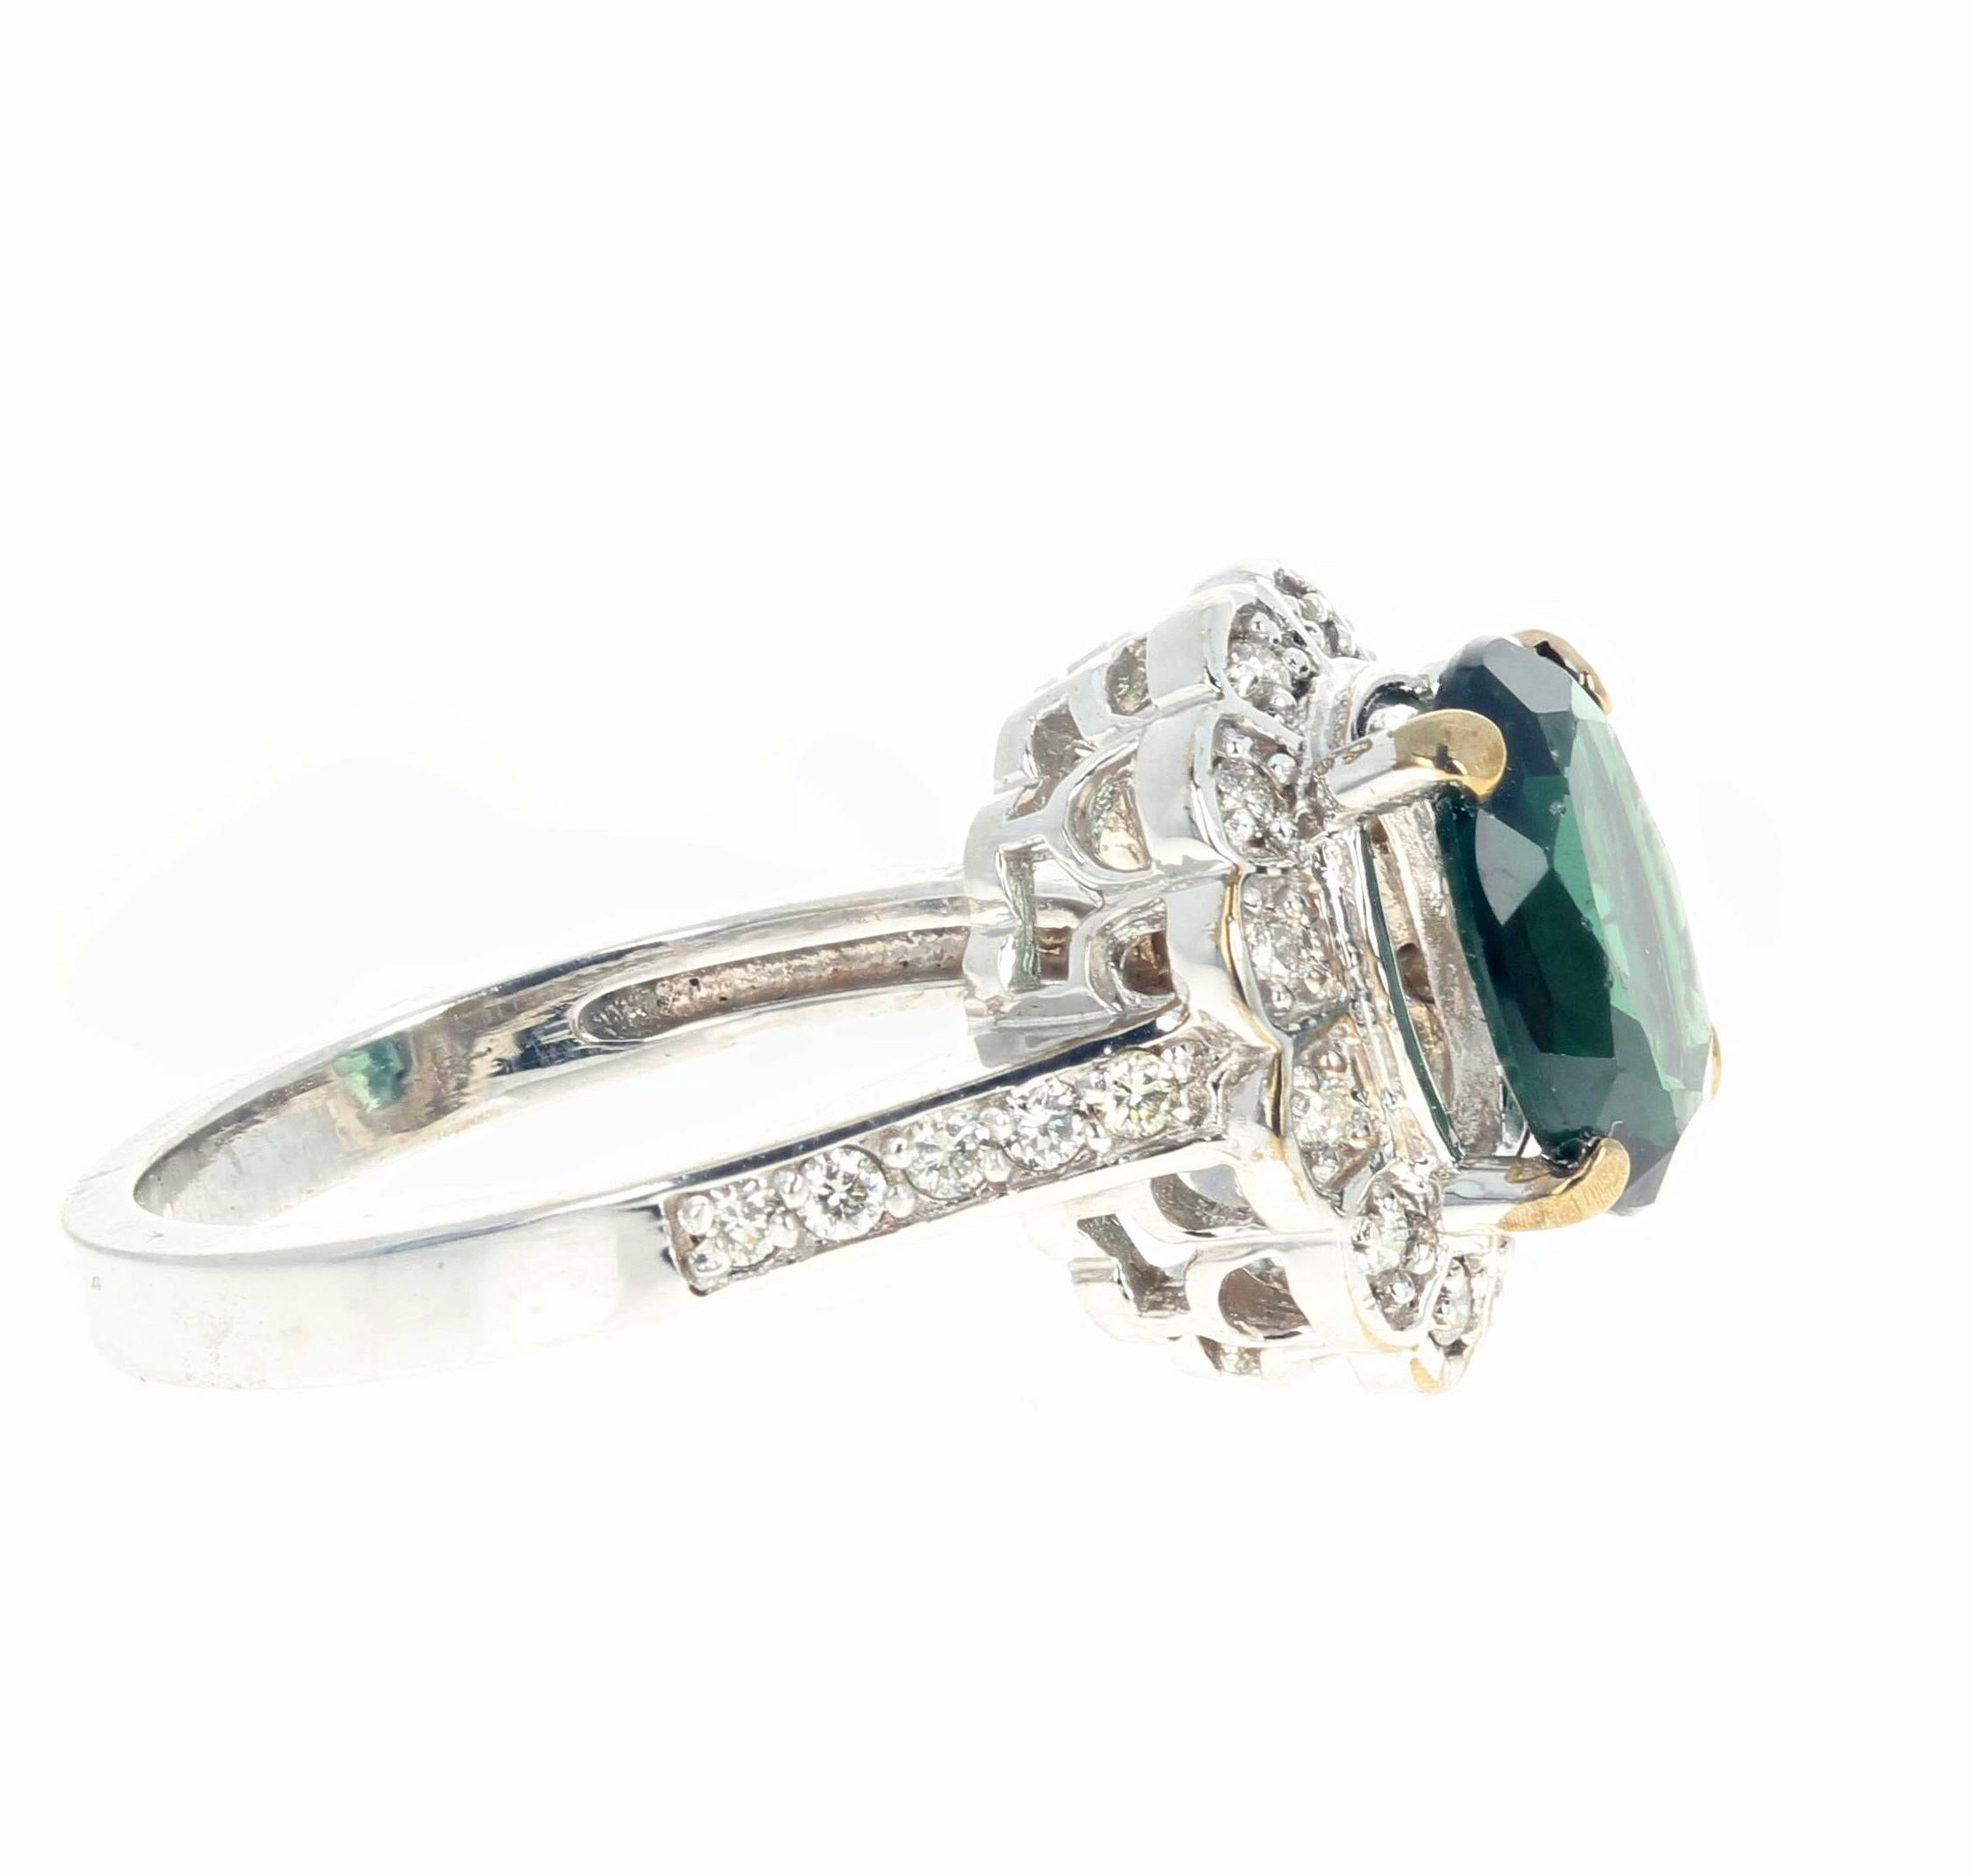 Mixed Cut AJD Intensely Glowing 2.23 Ct Green Apatite & White Diamonds Ring For Sale